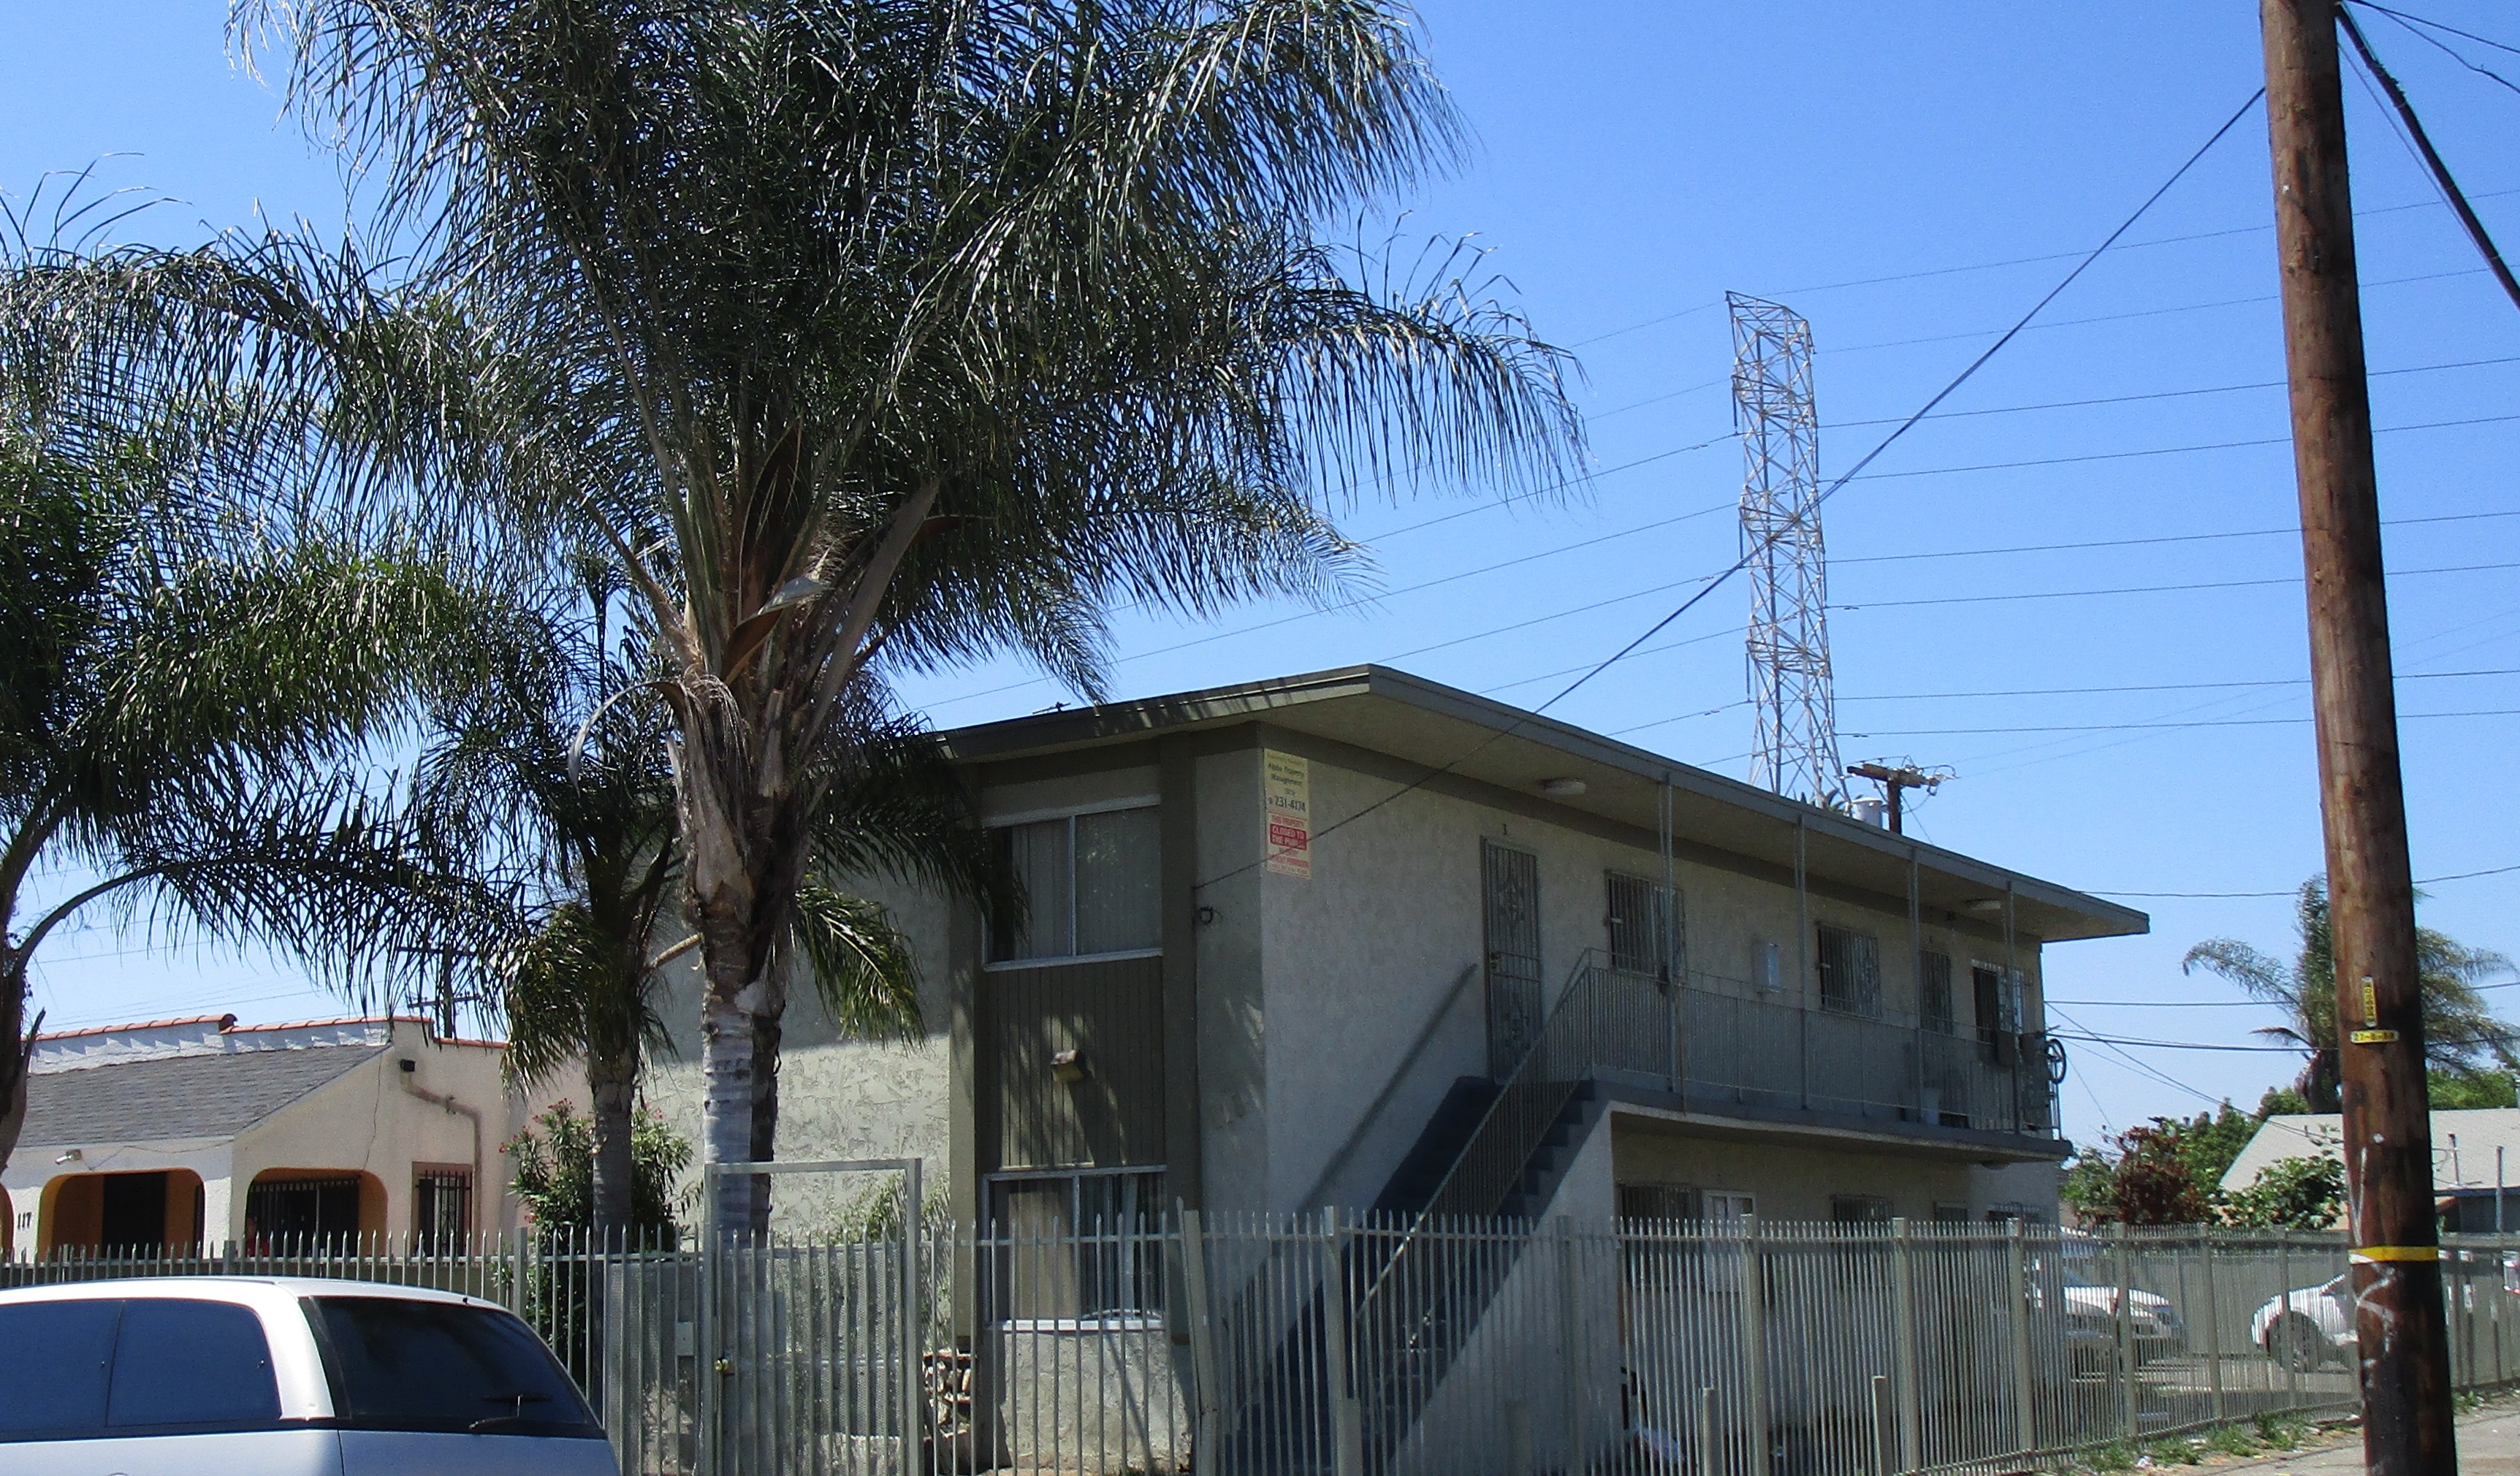 Corner side view of a two story building, multiple gated windows and iron screen doors, all gated, stairs up to the second floor with iron handrails, tall palm tree, light pole and parked cars, power tower in the back by the parking lot.